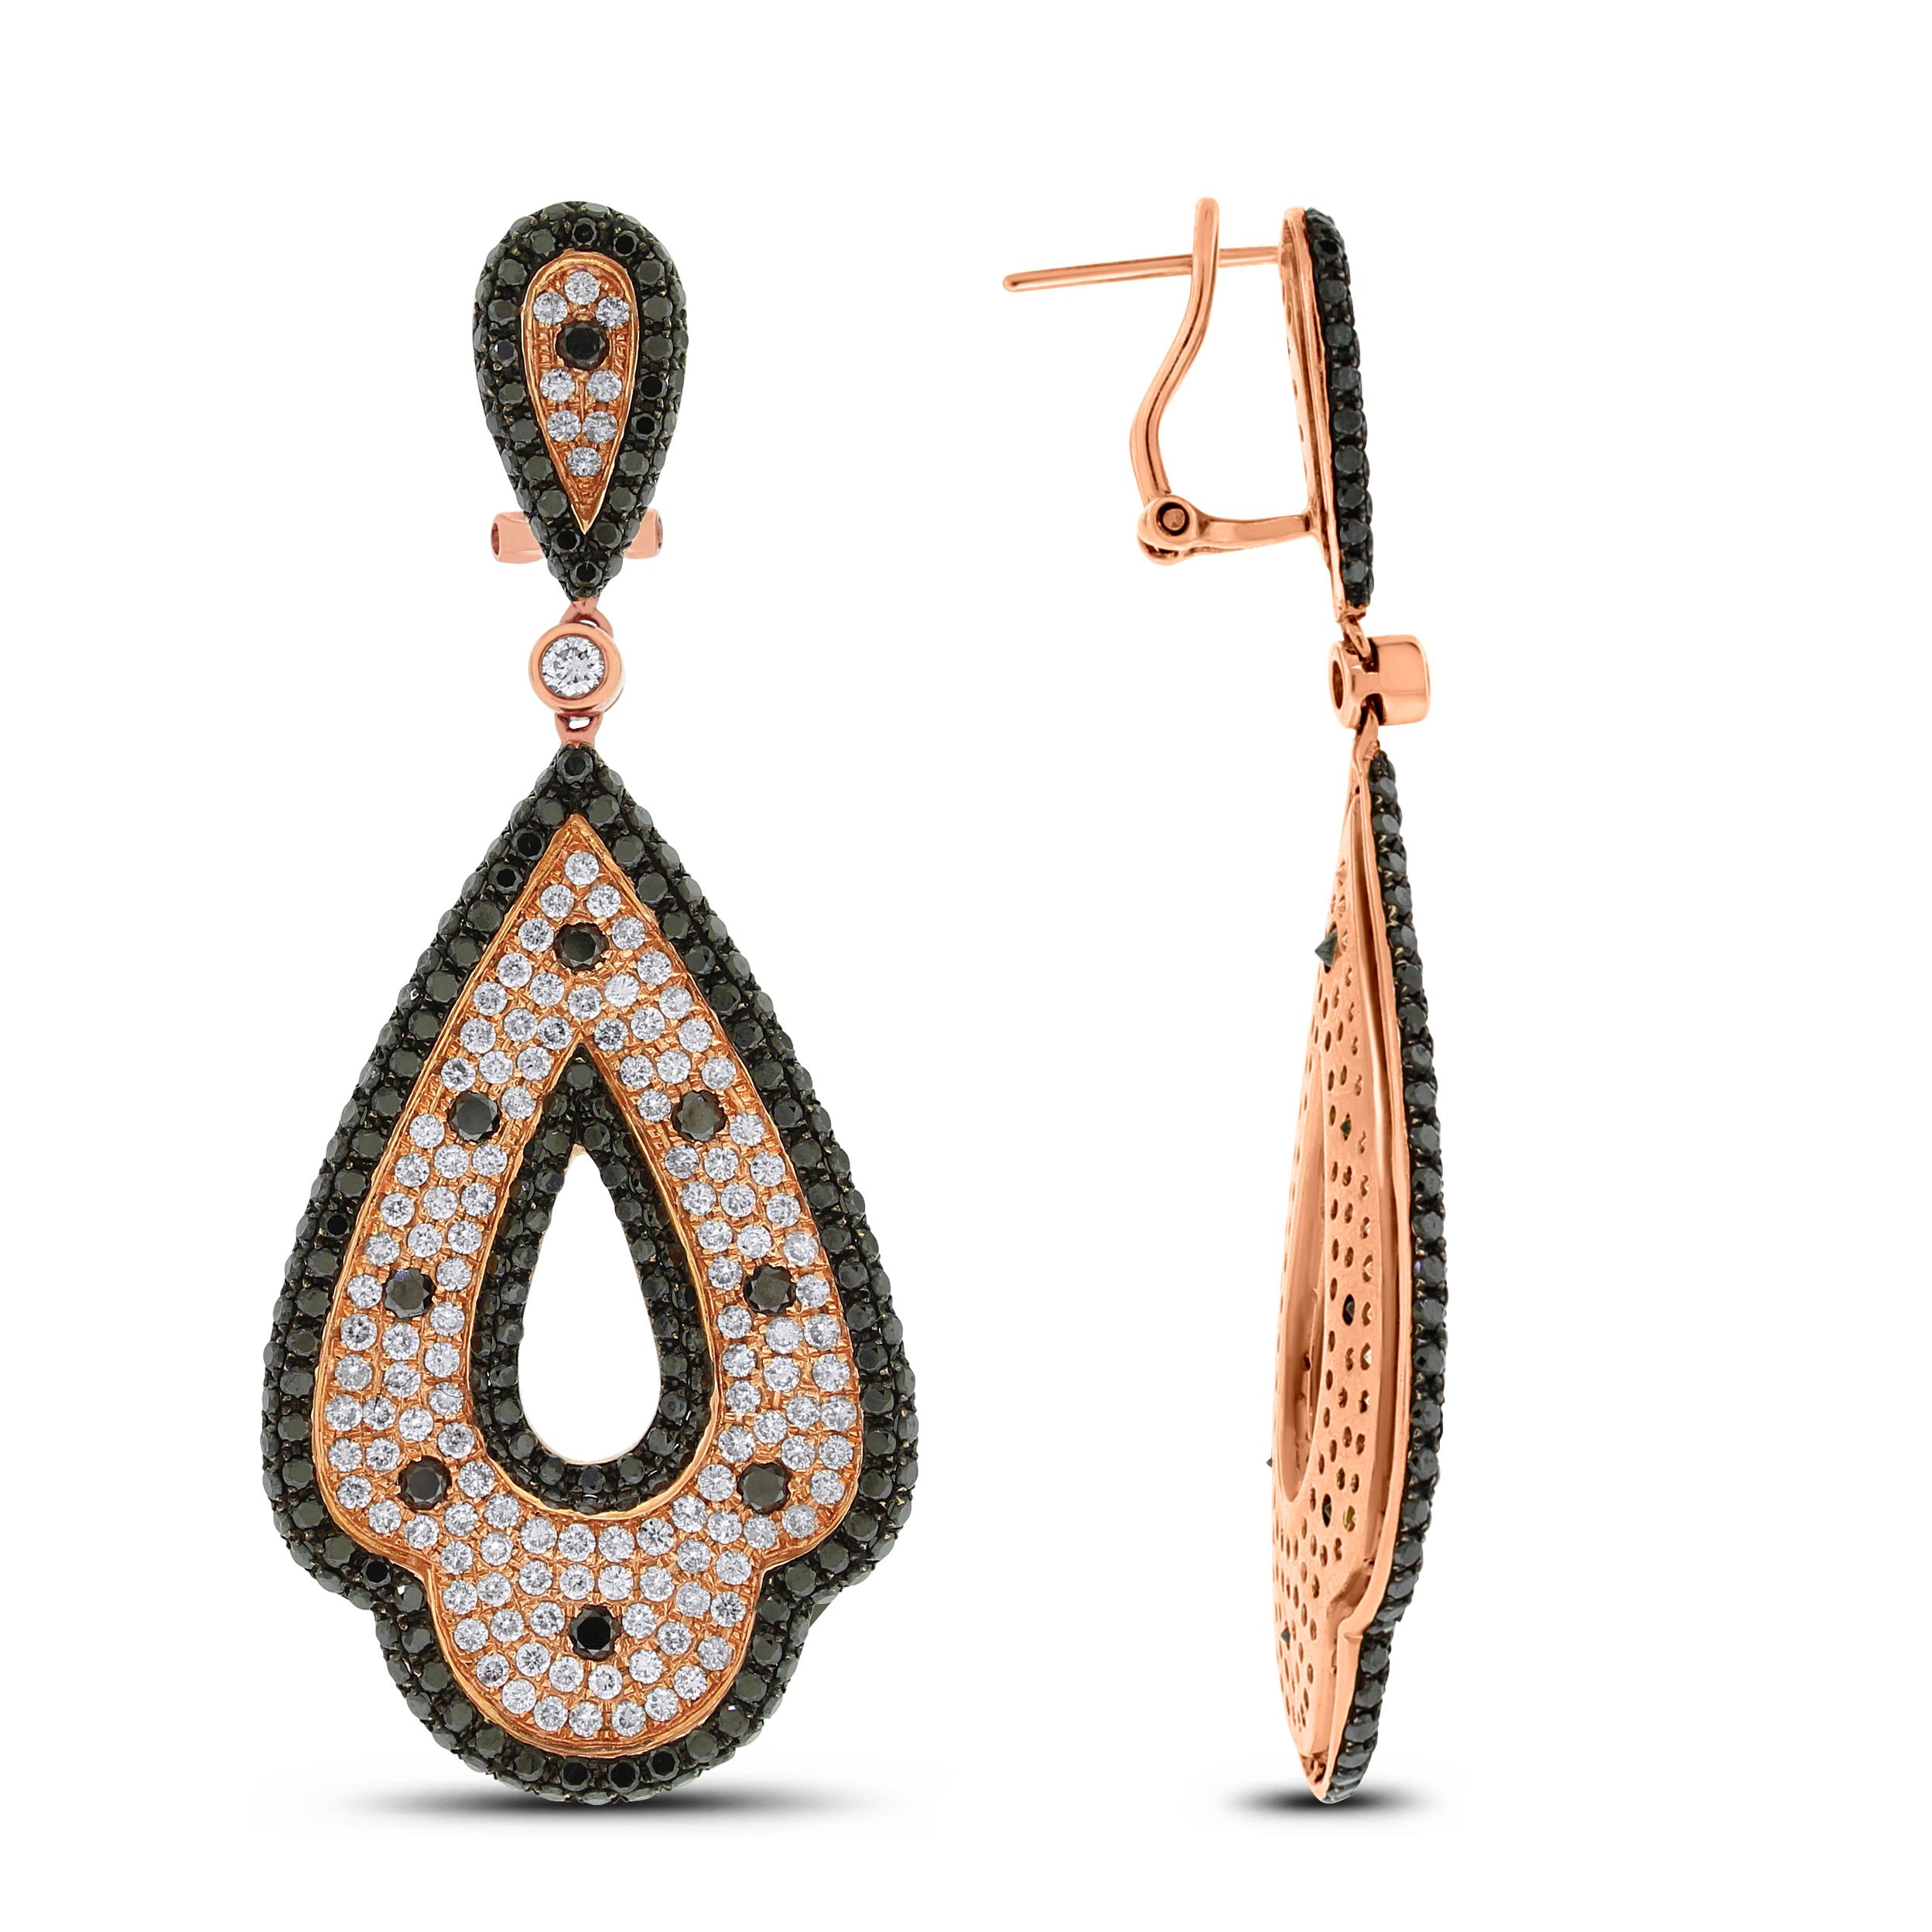 With White & Black Diamond set in Rose Gold, the Beauvince Enya earrings are simply precious!

Diamonds Shape: Round 
Diamonds Weight: 7.95 ct 
Diamond Color: G - H (White Diamonds) & Black 
Diamond Clarity: VS-SI (Very Slightly Included - Slightly